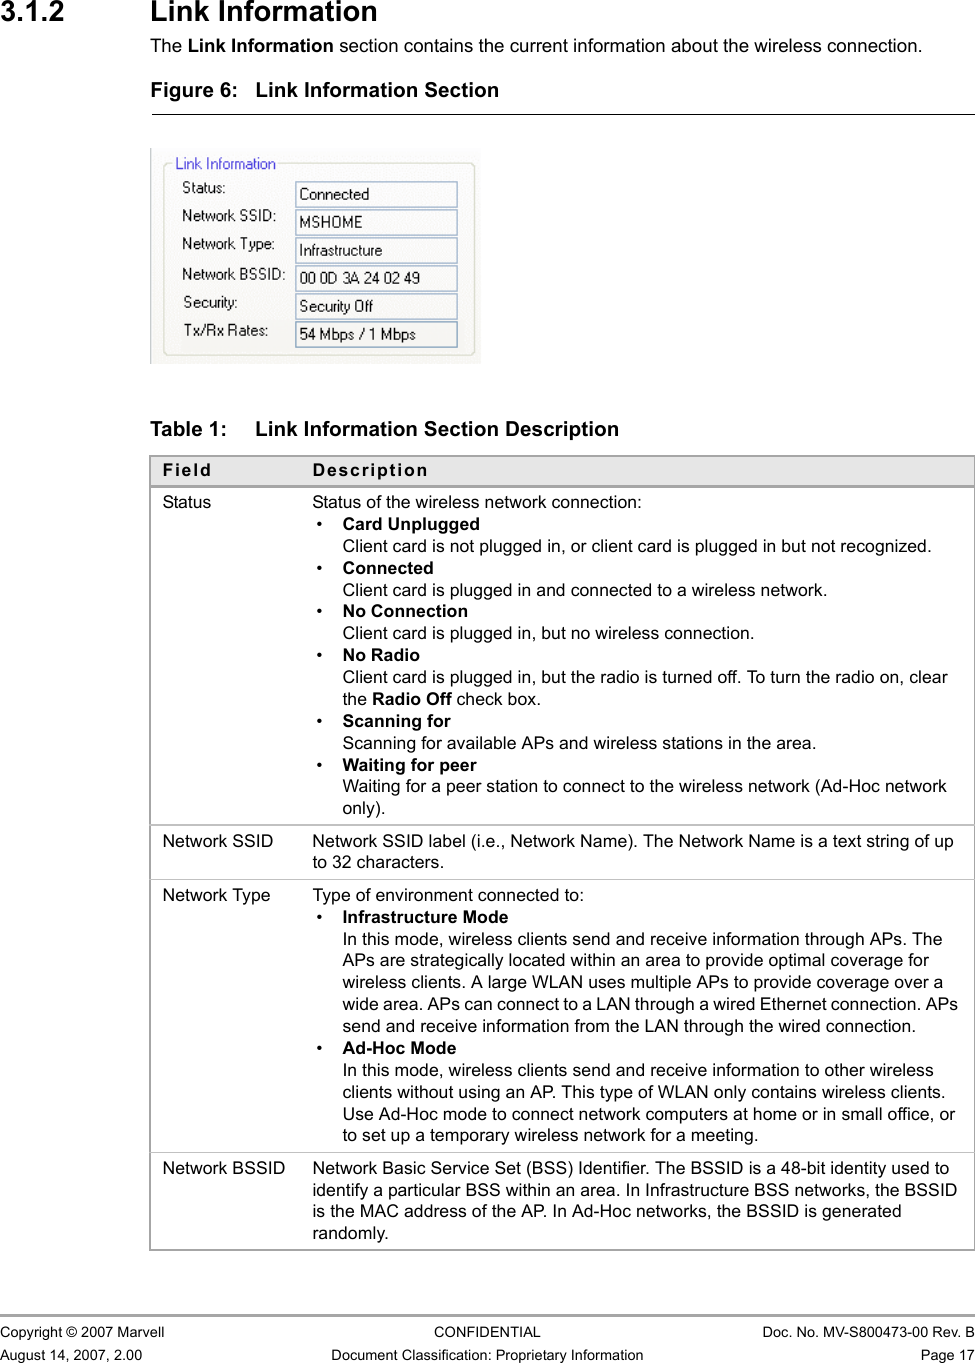 Marvell Wireless Configuration Utility User InterfaceNetwork Status Tab                         Copyright © 2007 Marvell CONFIDENTIAL Doc. No. MV-S800473-00 Rev. BAugust 14, 2007, 2.00 Document Classification: Proprietary Information Page 17 3.1.2 Link InformationThe Link Information section contains the current information about the wireless connection.                         Figure 6: Link Information Section                         Table 1: Link Information Section DescriptionField DescriptionStatus Status of the wireless network connection:•Card UnpluggedClient card is not plugged in, or client card is plugged in but not recognized.•ConnectedClient card is plugged in and connected to a wireless network.•No ConnectionClient card is plugged in, but no wireless connection.•No RadioClient card is plugged in, but the radio is turned off. To turn the radio on, clear the Radio Off check box.•Scanning forScanning for available APs and wireless stations in the area.•Waiting for peerWaiting for a peer station to connect to the wireless network (Ad-Hoc network only).Network SSID Network SSID label (i.e., Network Name). The Network Name is a text string of up to 32 characters.Network Type Type of environment connected to:•Infrastructure ModeIn this mode, wireless clients send and receive information through APs. The APs are strategically located within an area to provide optimal coverage for wireless clients. A large WLAN uses multiple APs to provide coverage over a wide area. APs can connect to a LAN through a wired Ethernet connection. APs send and receive information from the LAN through the wired connection.•Ad-Hoc ModeIn this mode, wireless clients send and receive information to other wireless clients without using an AP. This type of WLAN only contains wireless clients. Use Ad-Hoc mode to connect network computers at home or in small office, or to set up a temporary wireless network for a meeting. Network BSSID Network Basic Service Set (BSS) Identifier. The BSSID is a 48-bit identity used to identify a particular BSS within an area. In Infrastructure BSS networks, the BSSID is the MAC address of the AP. In Ad-Hoc networks, the BSSID is generated randomly.